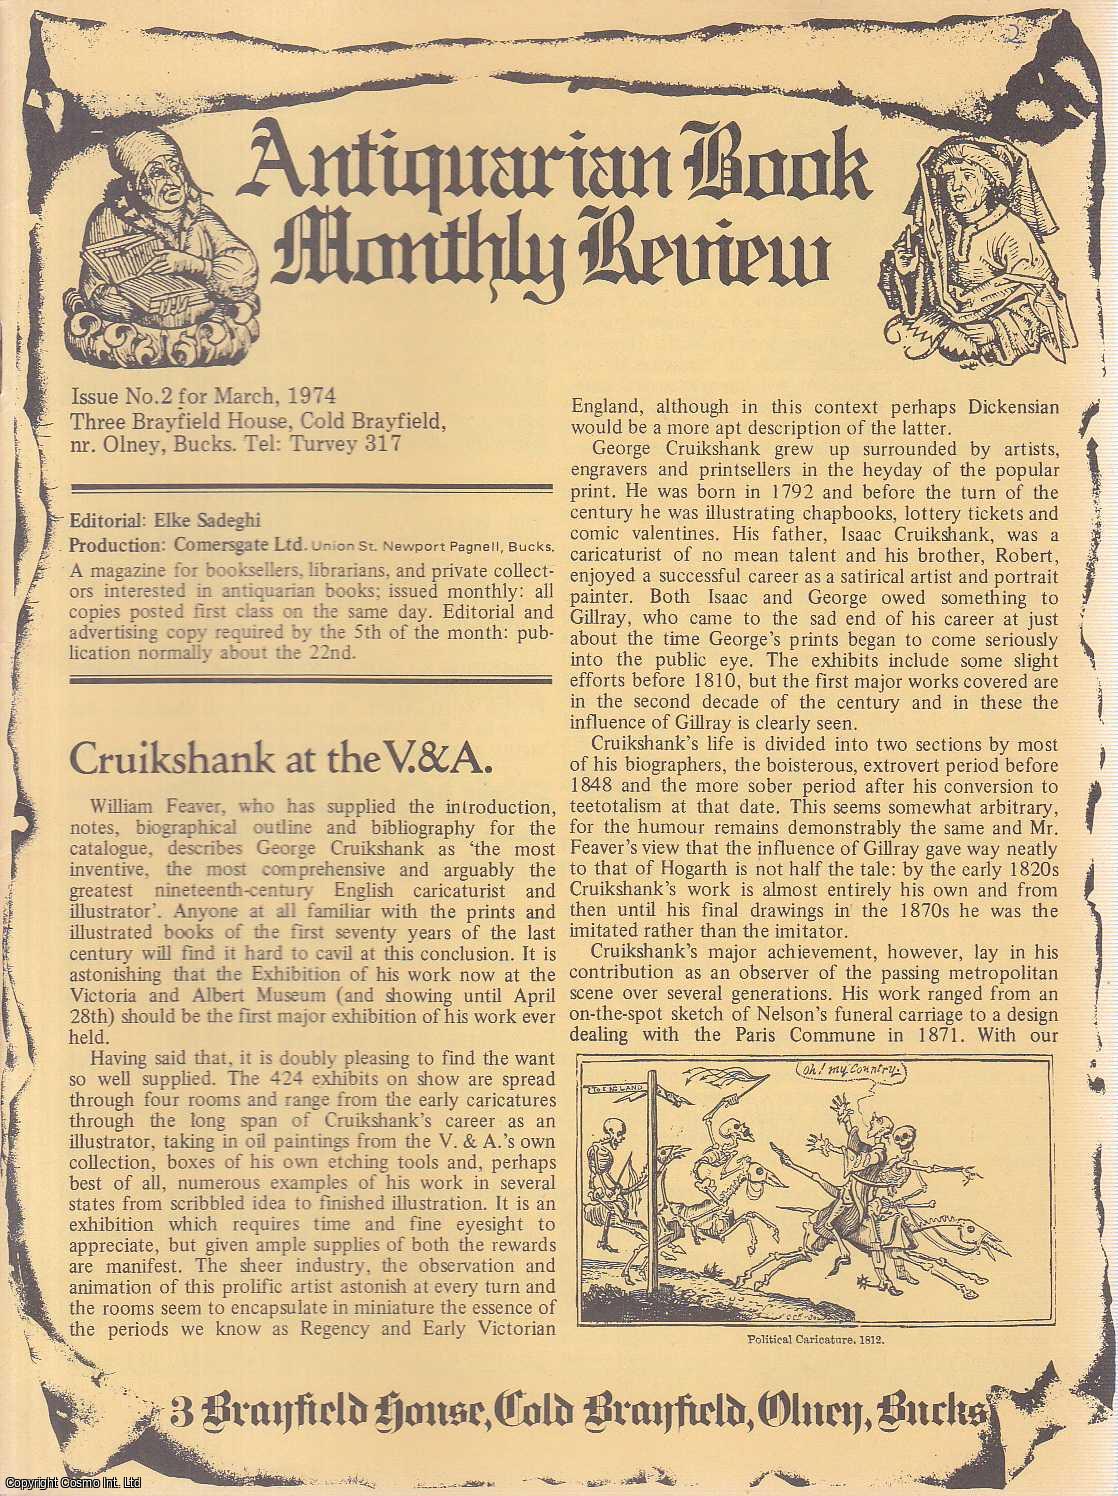 Unstated - Bookman's Cambridge. Bookmen Out of London. An original article contained in a complete monthly issue of the Antiquarian Book Monthly Review, 1974.